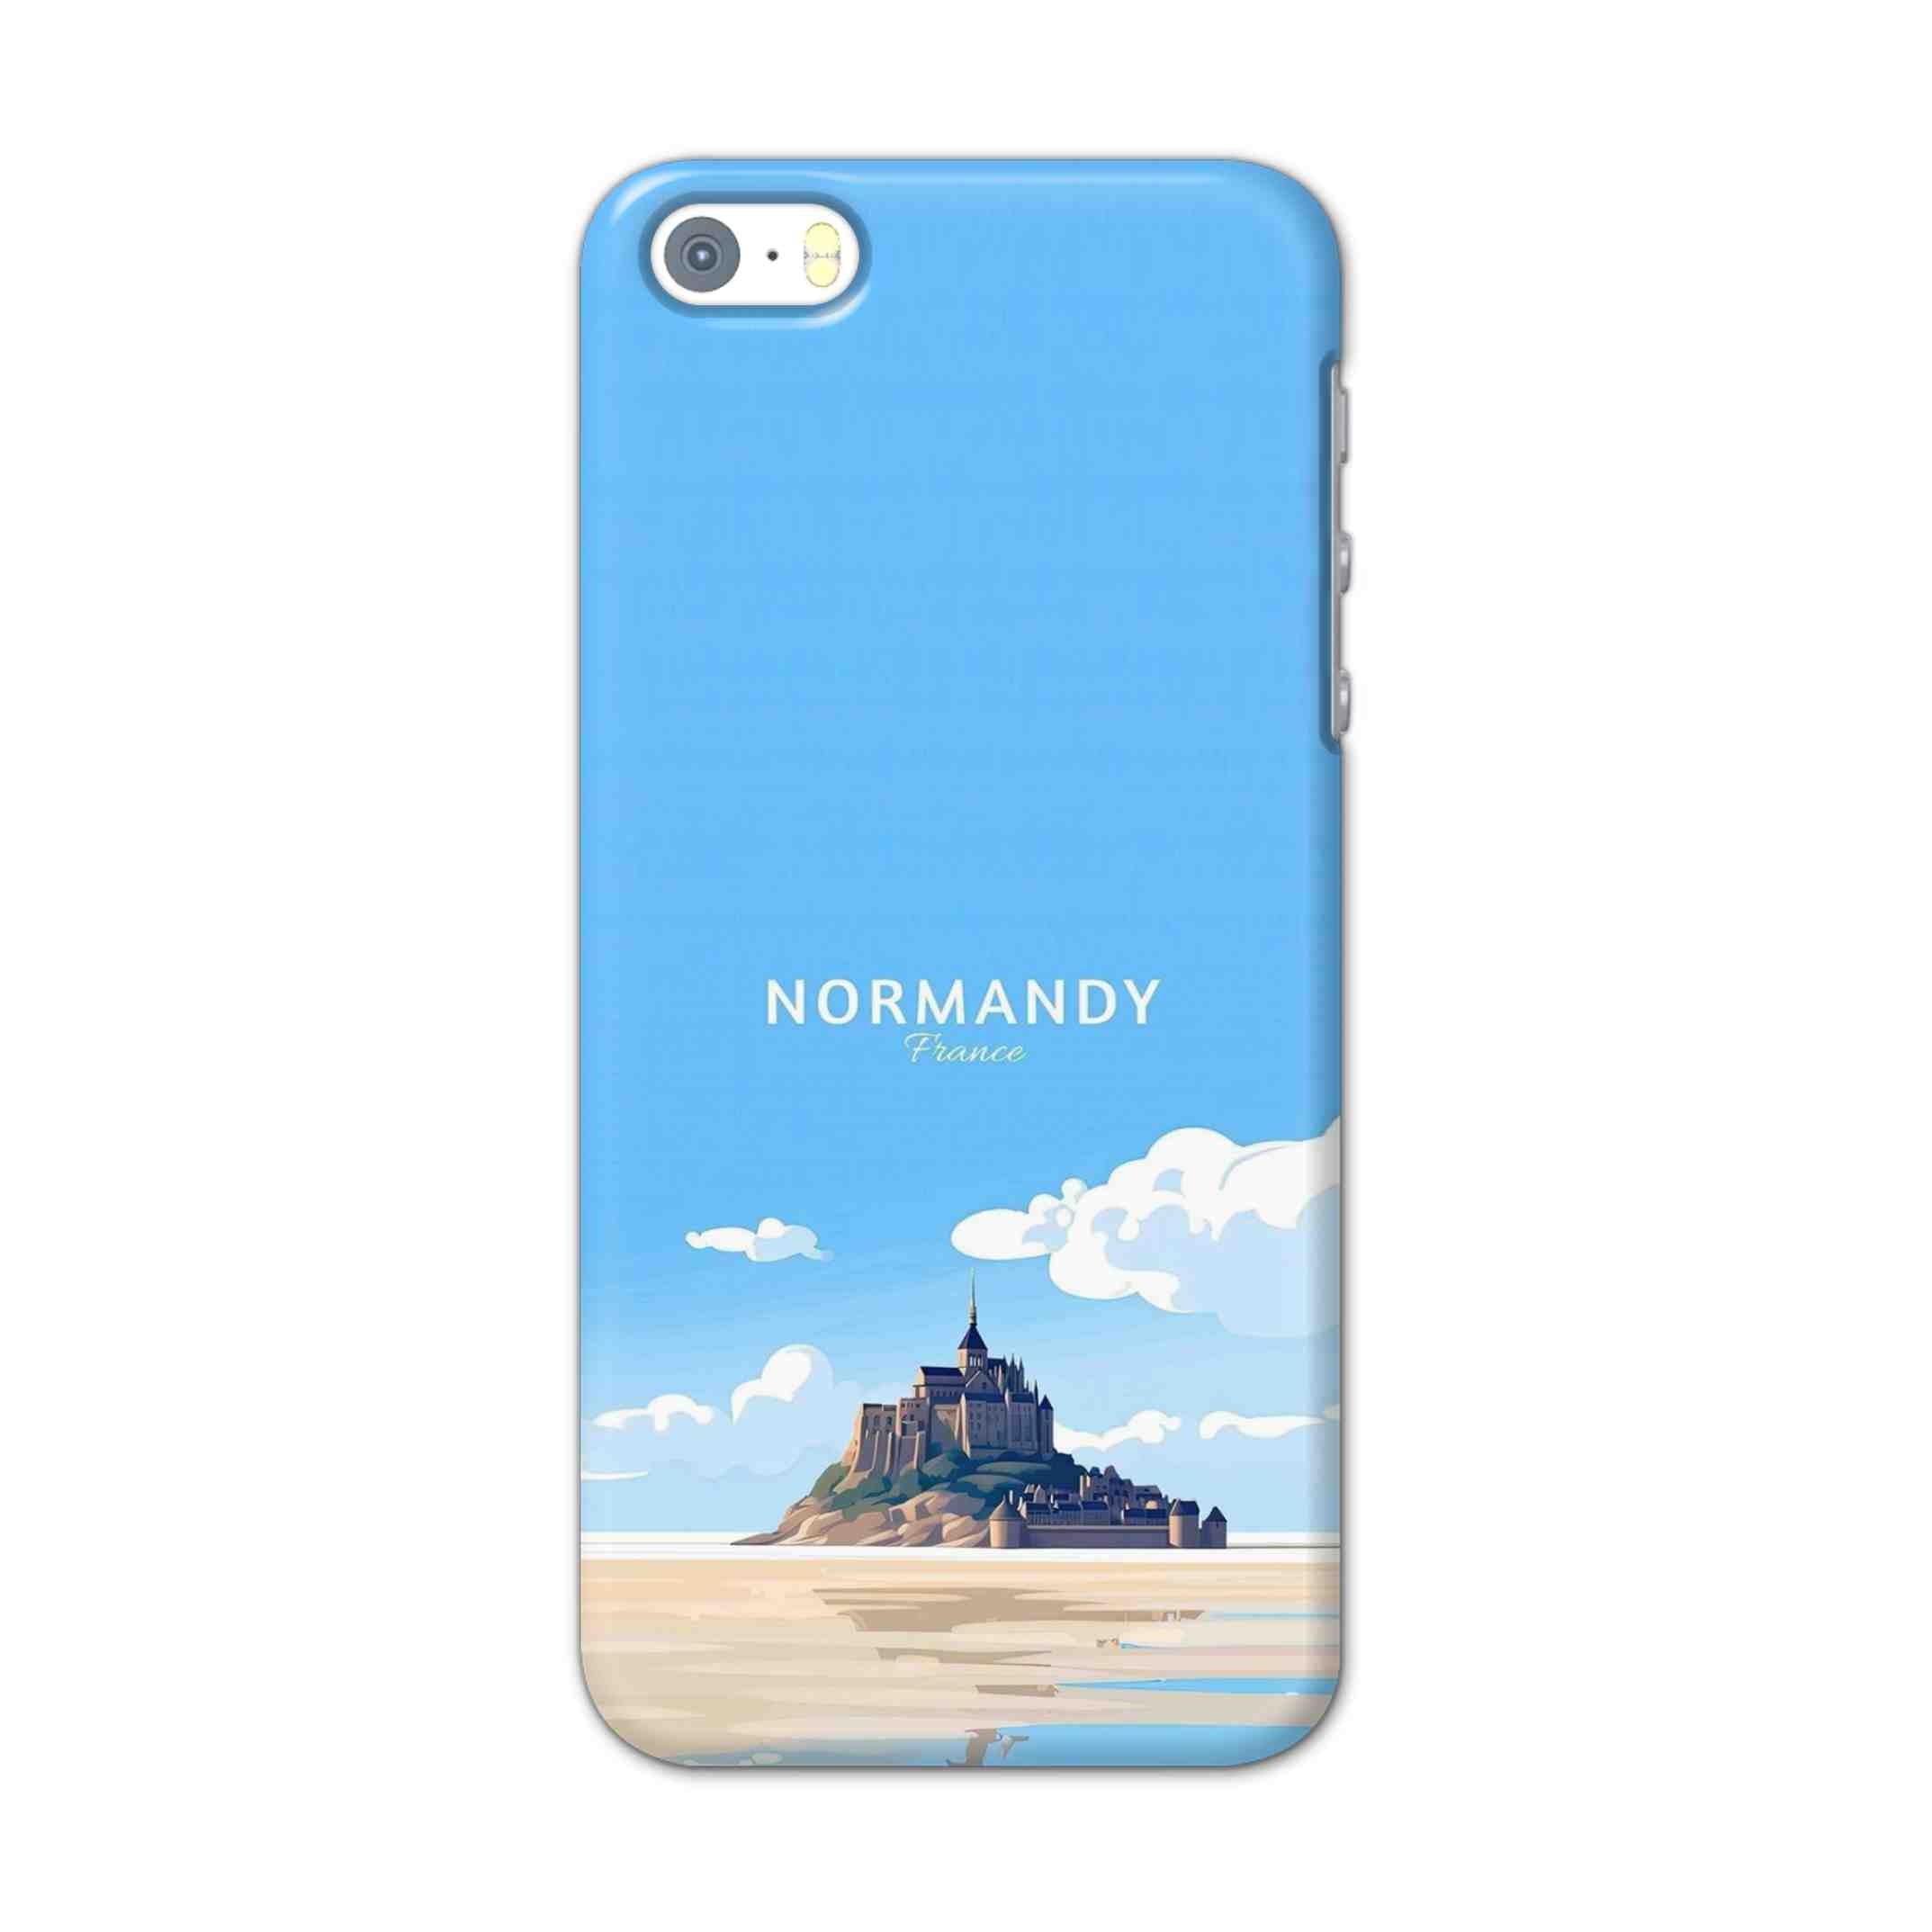 Buy Normandy Hard Back Mobile Phone Case/Cover For Apple Iphone SE Online